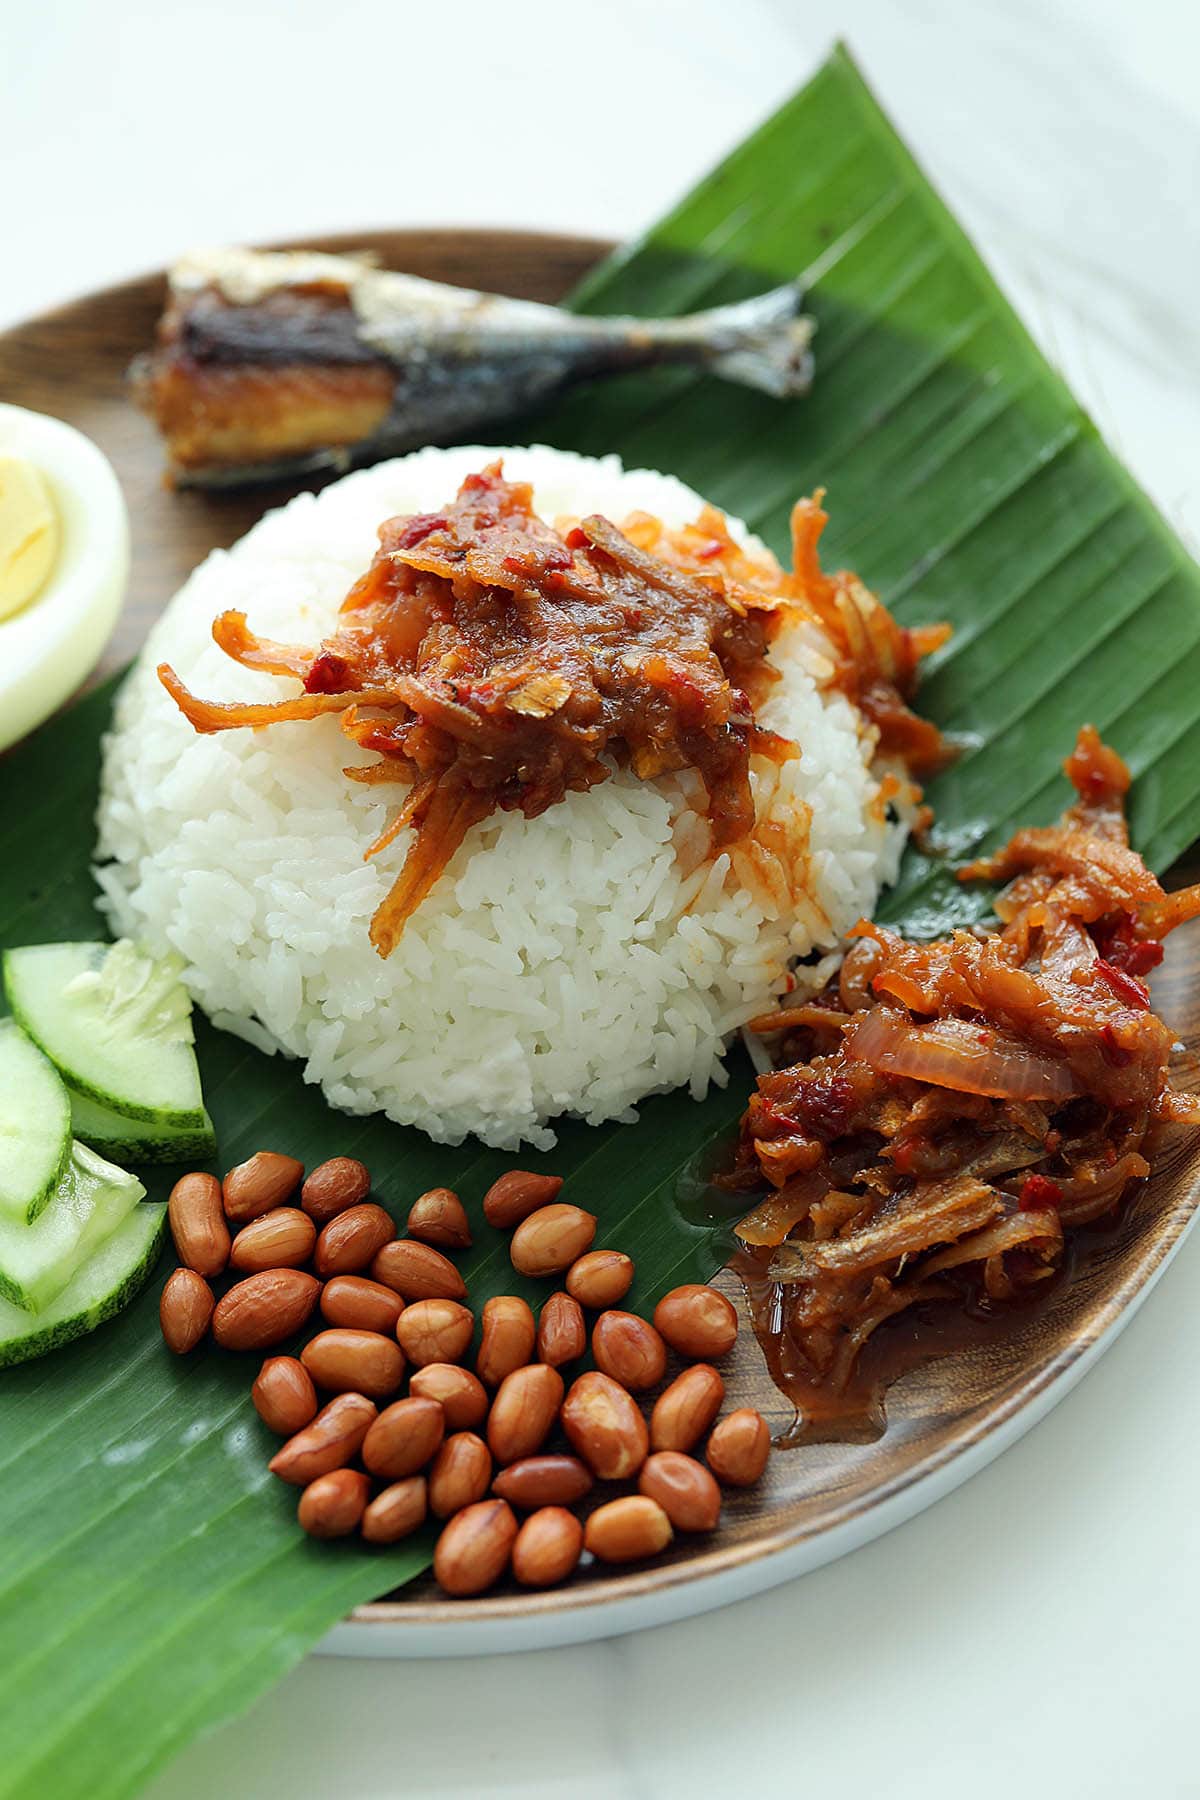 Nasi lemak on a banana leaf with sambal, anchovies, toasted peanuts, fried fish, and cucumber.